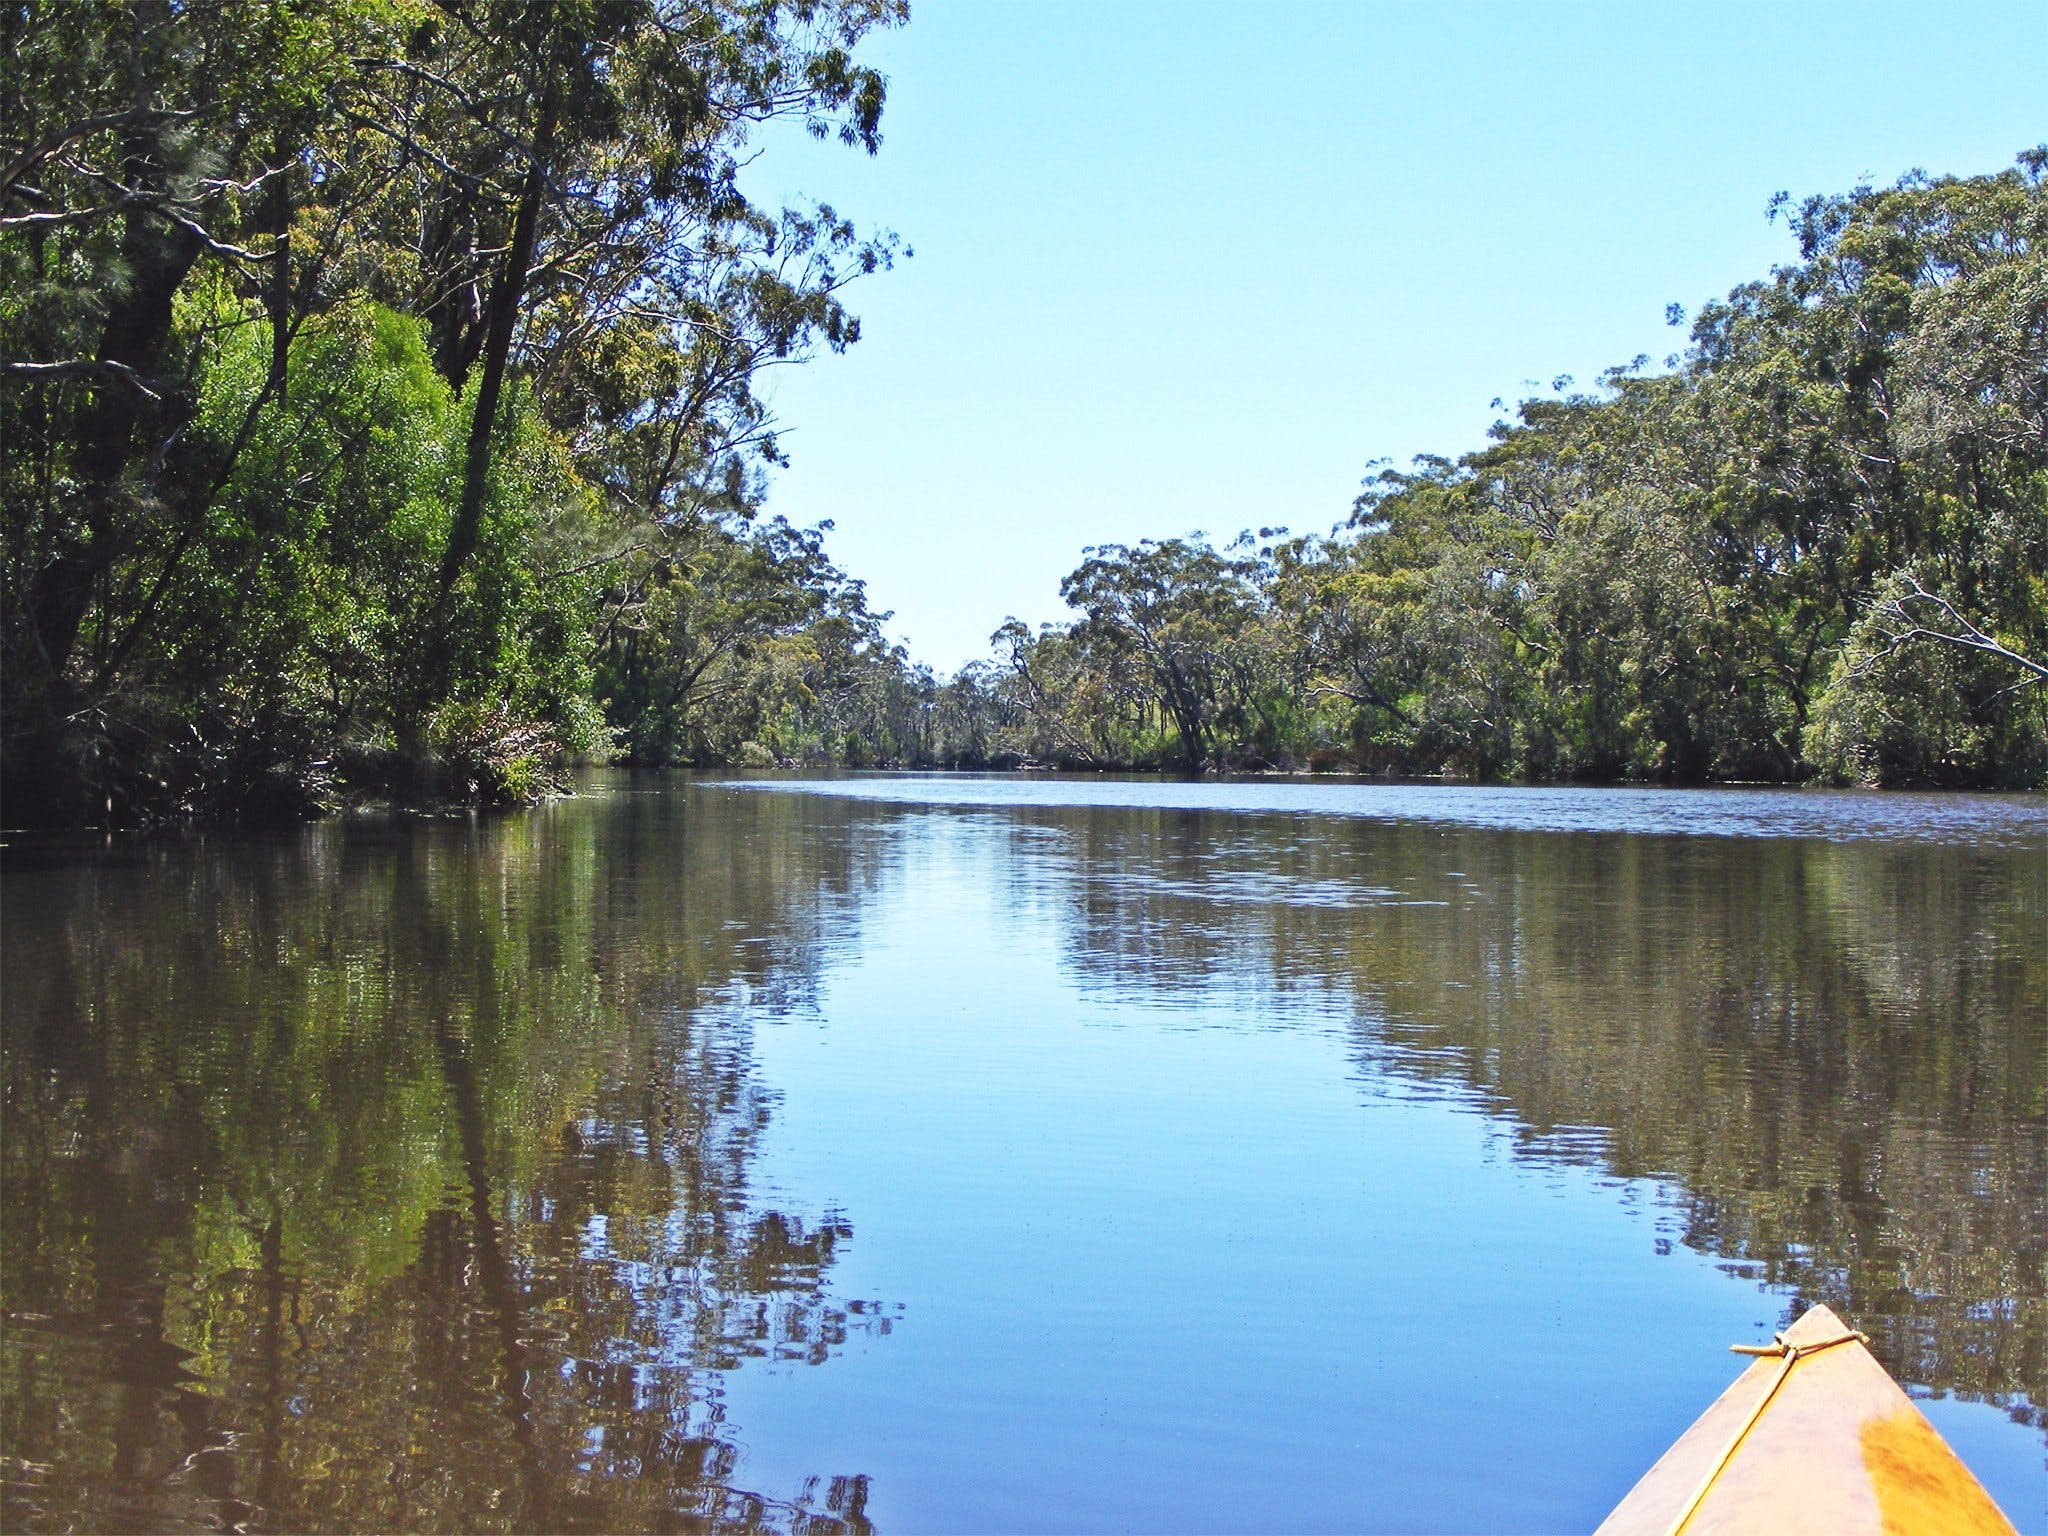 Esk River - Attractions